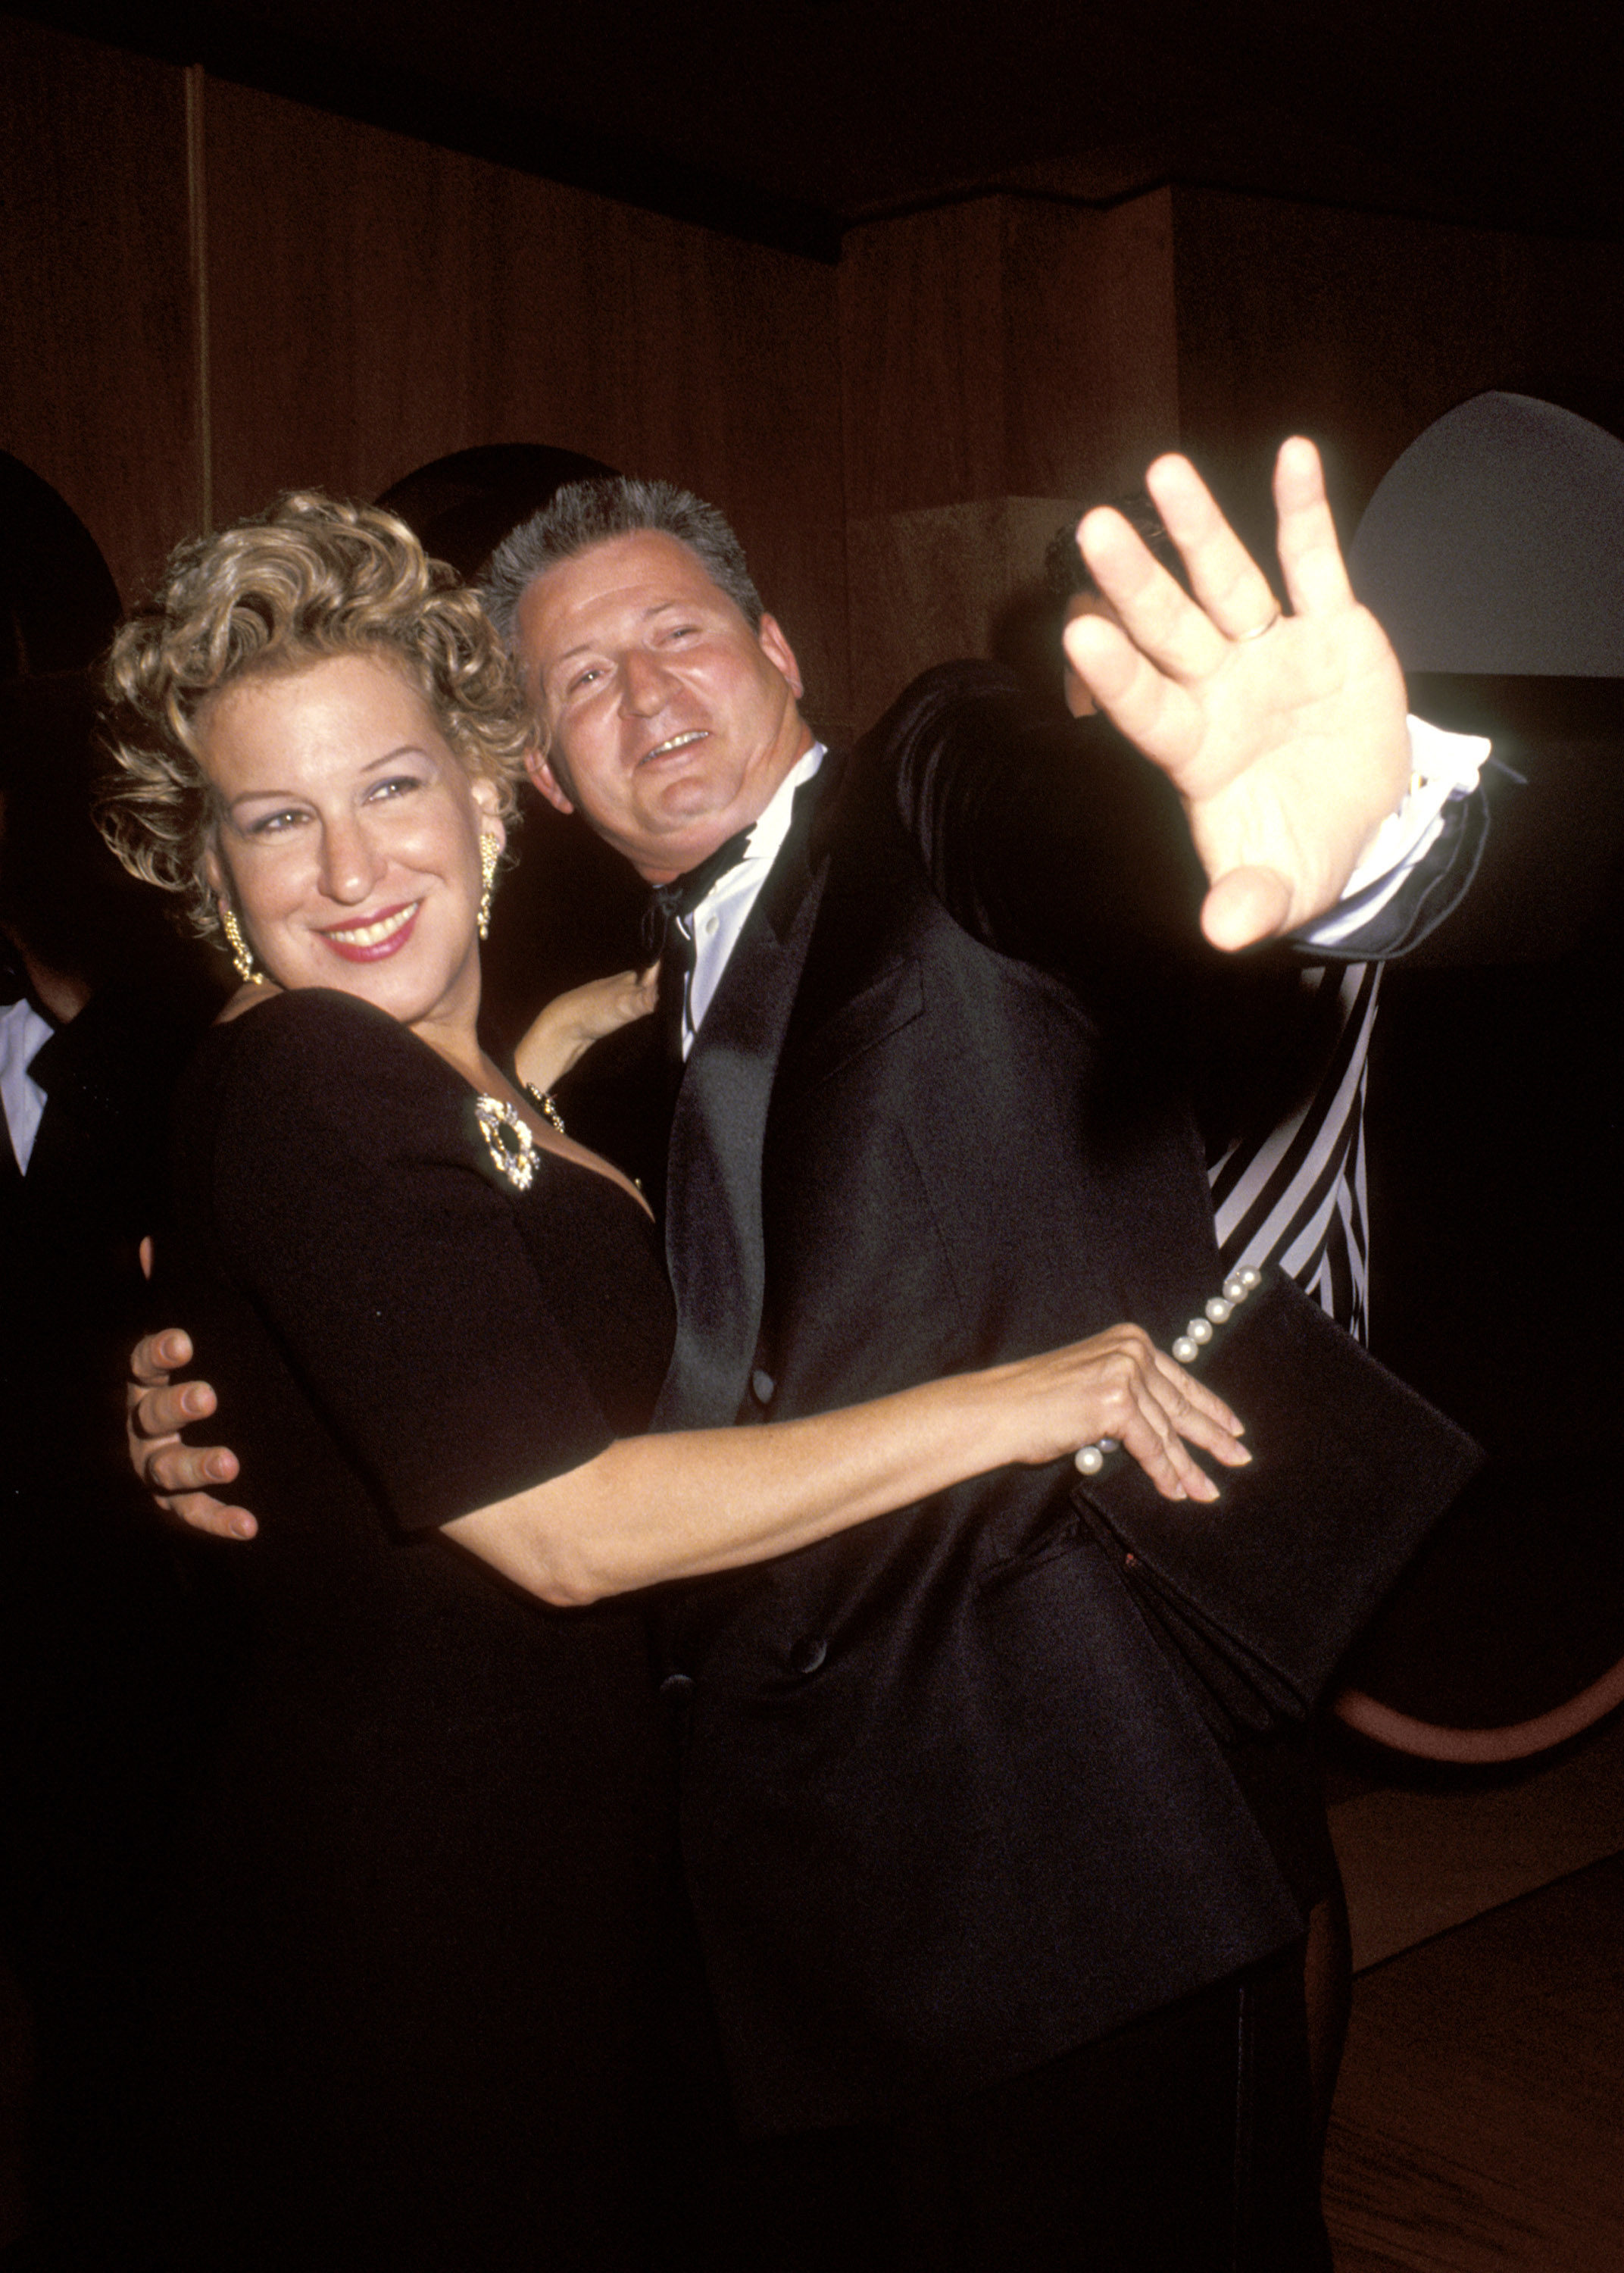 Bette Midler and Martin von Haselberg during "Valentino : Thirty Years of Magic" Gala Retrospective at 67th Street Armory in New York City, New York, United States | Source: Getty Images